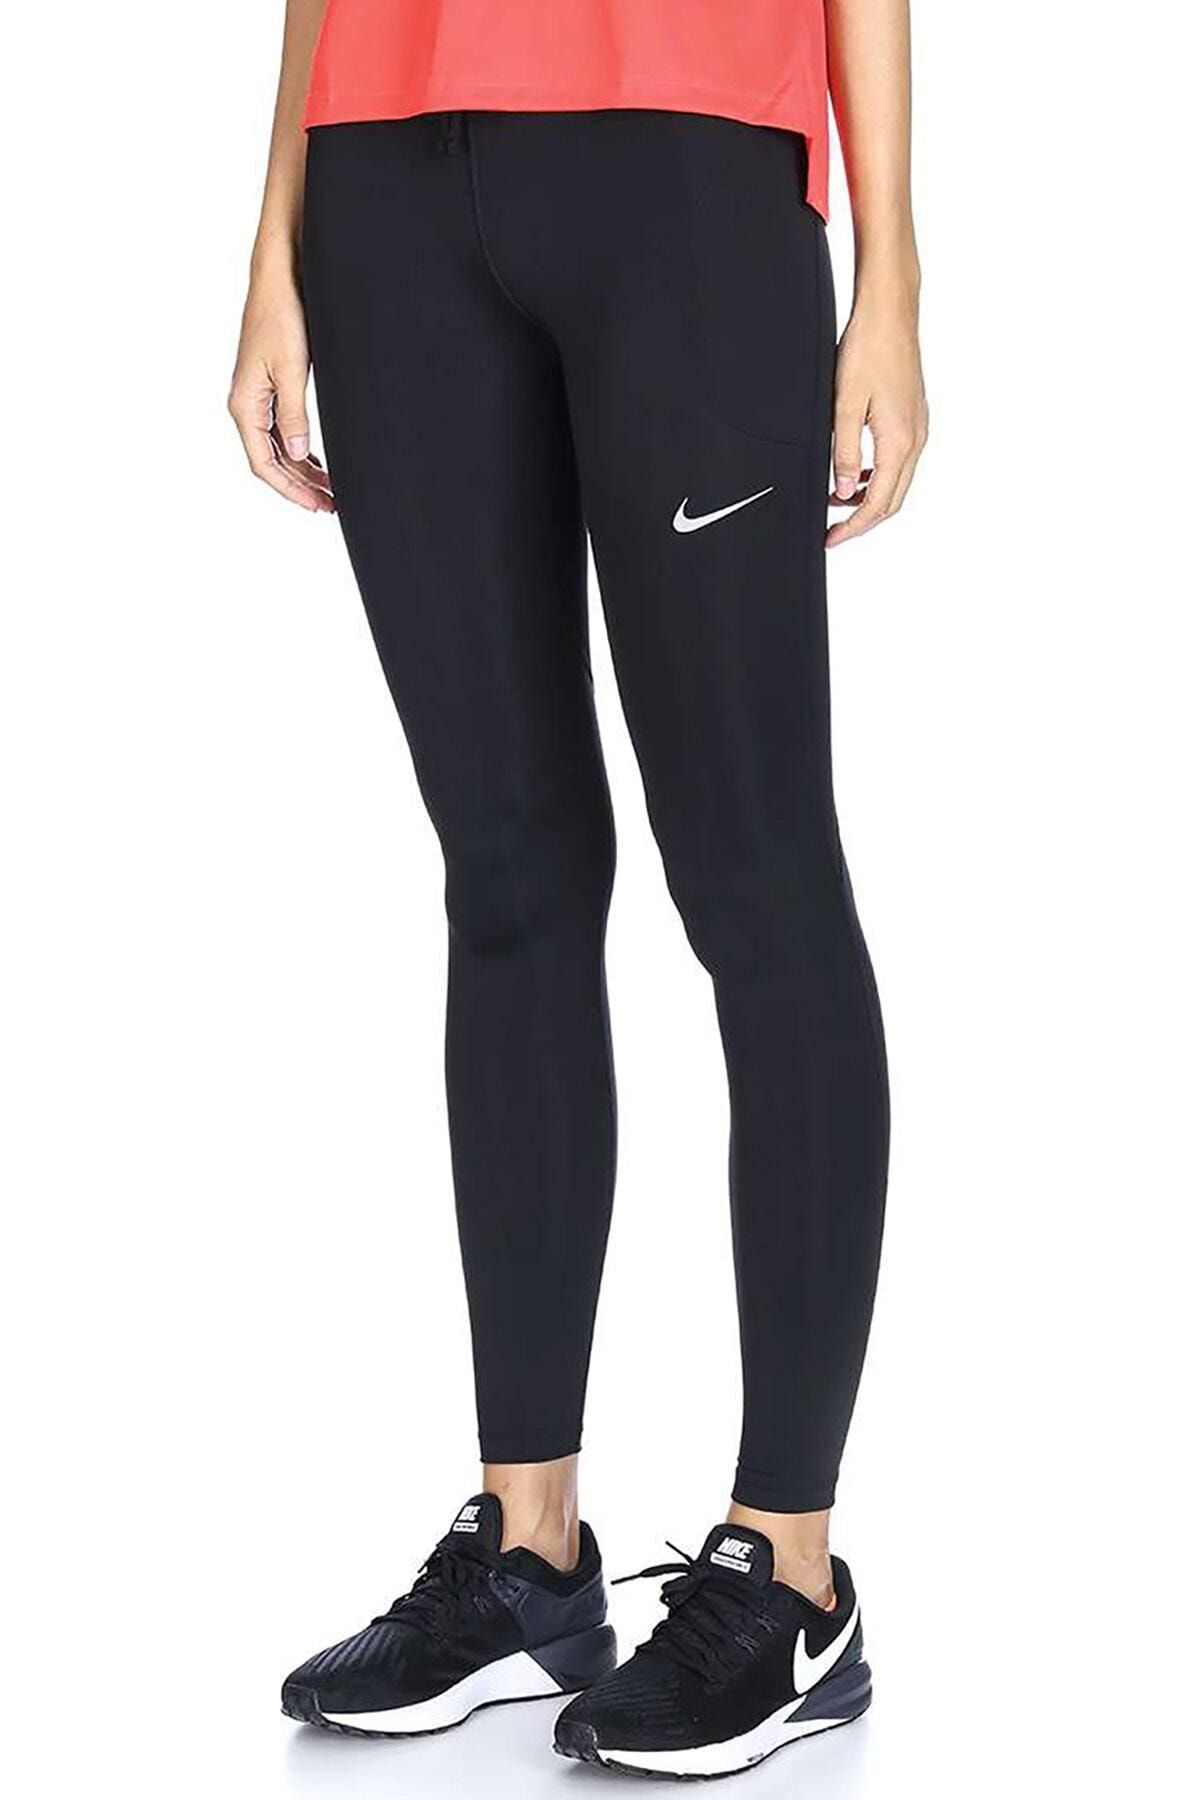 Nike Fast Tght Mr Women's Tights At3103-010 - Trendyol